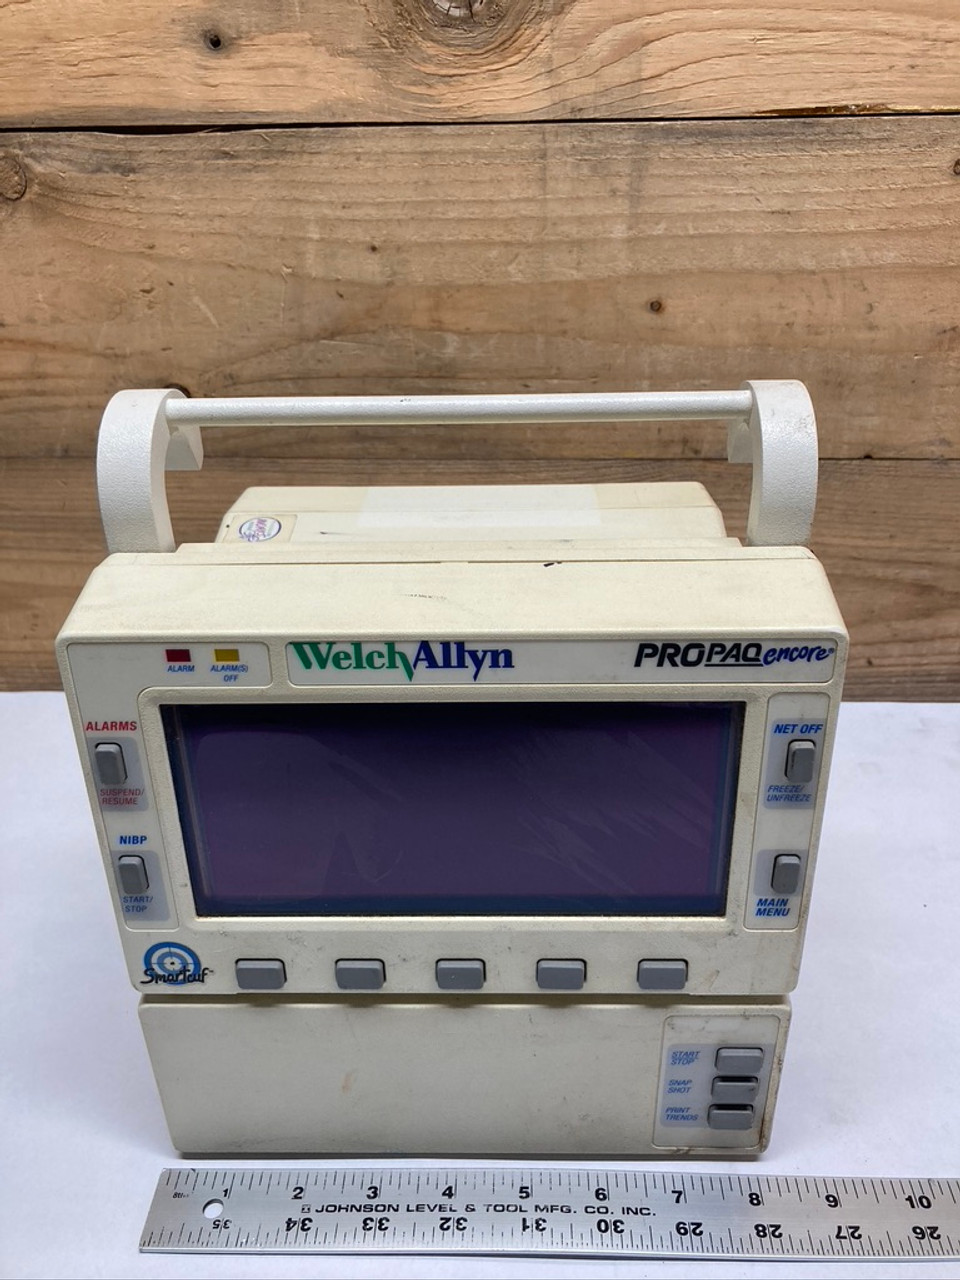 Welch Allyn Propaq 206 EMPS Patient Vital Signs Monitor